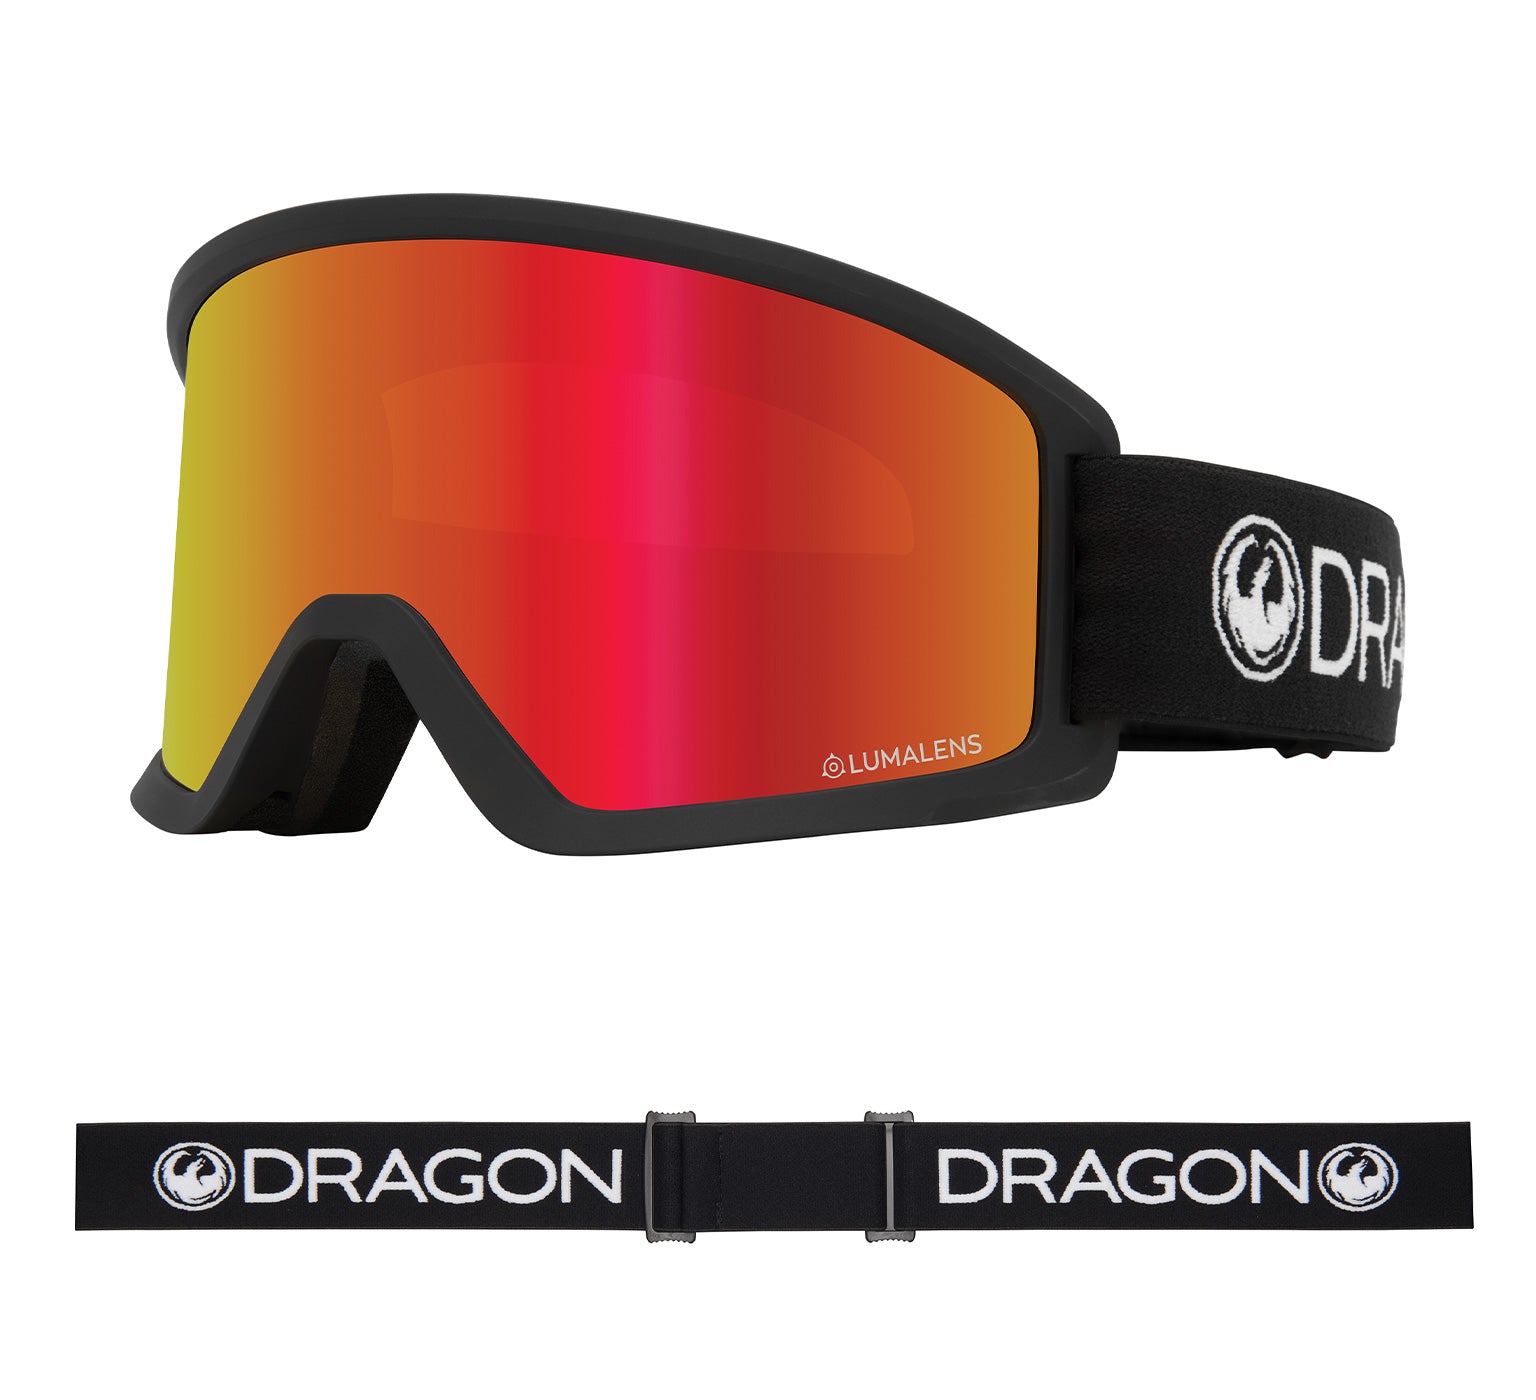 DX3 OTG - Black with Lumalens Red Ionized Lens 40494-001 - Dragon